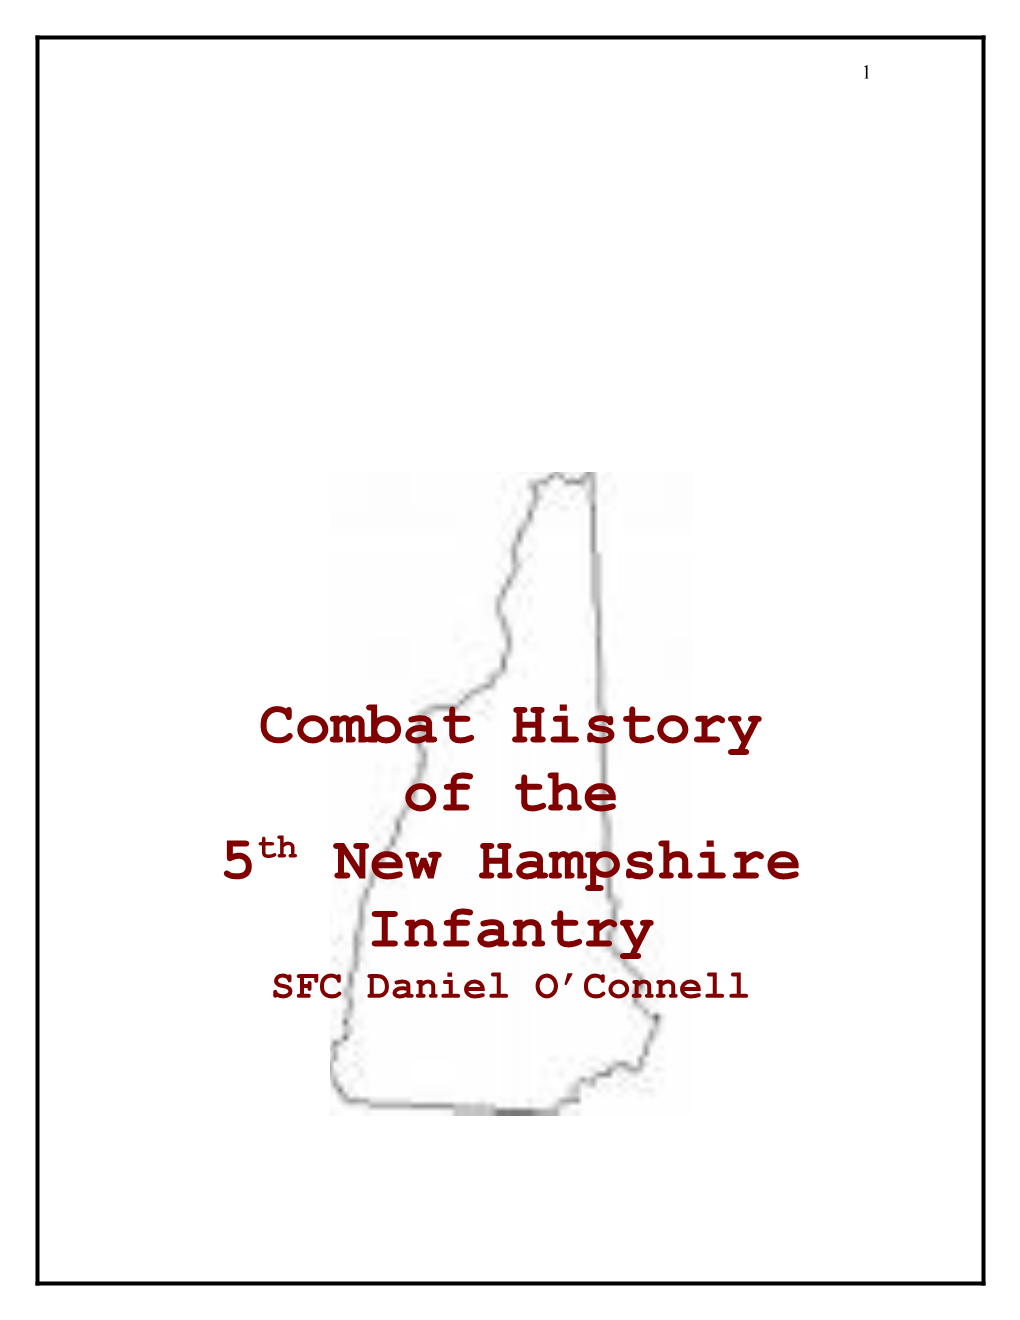 Most Civil War Enthusiasts Know That the 5Th New Hampshire Infantry Regiment Is Credited